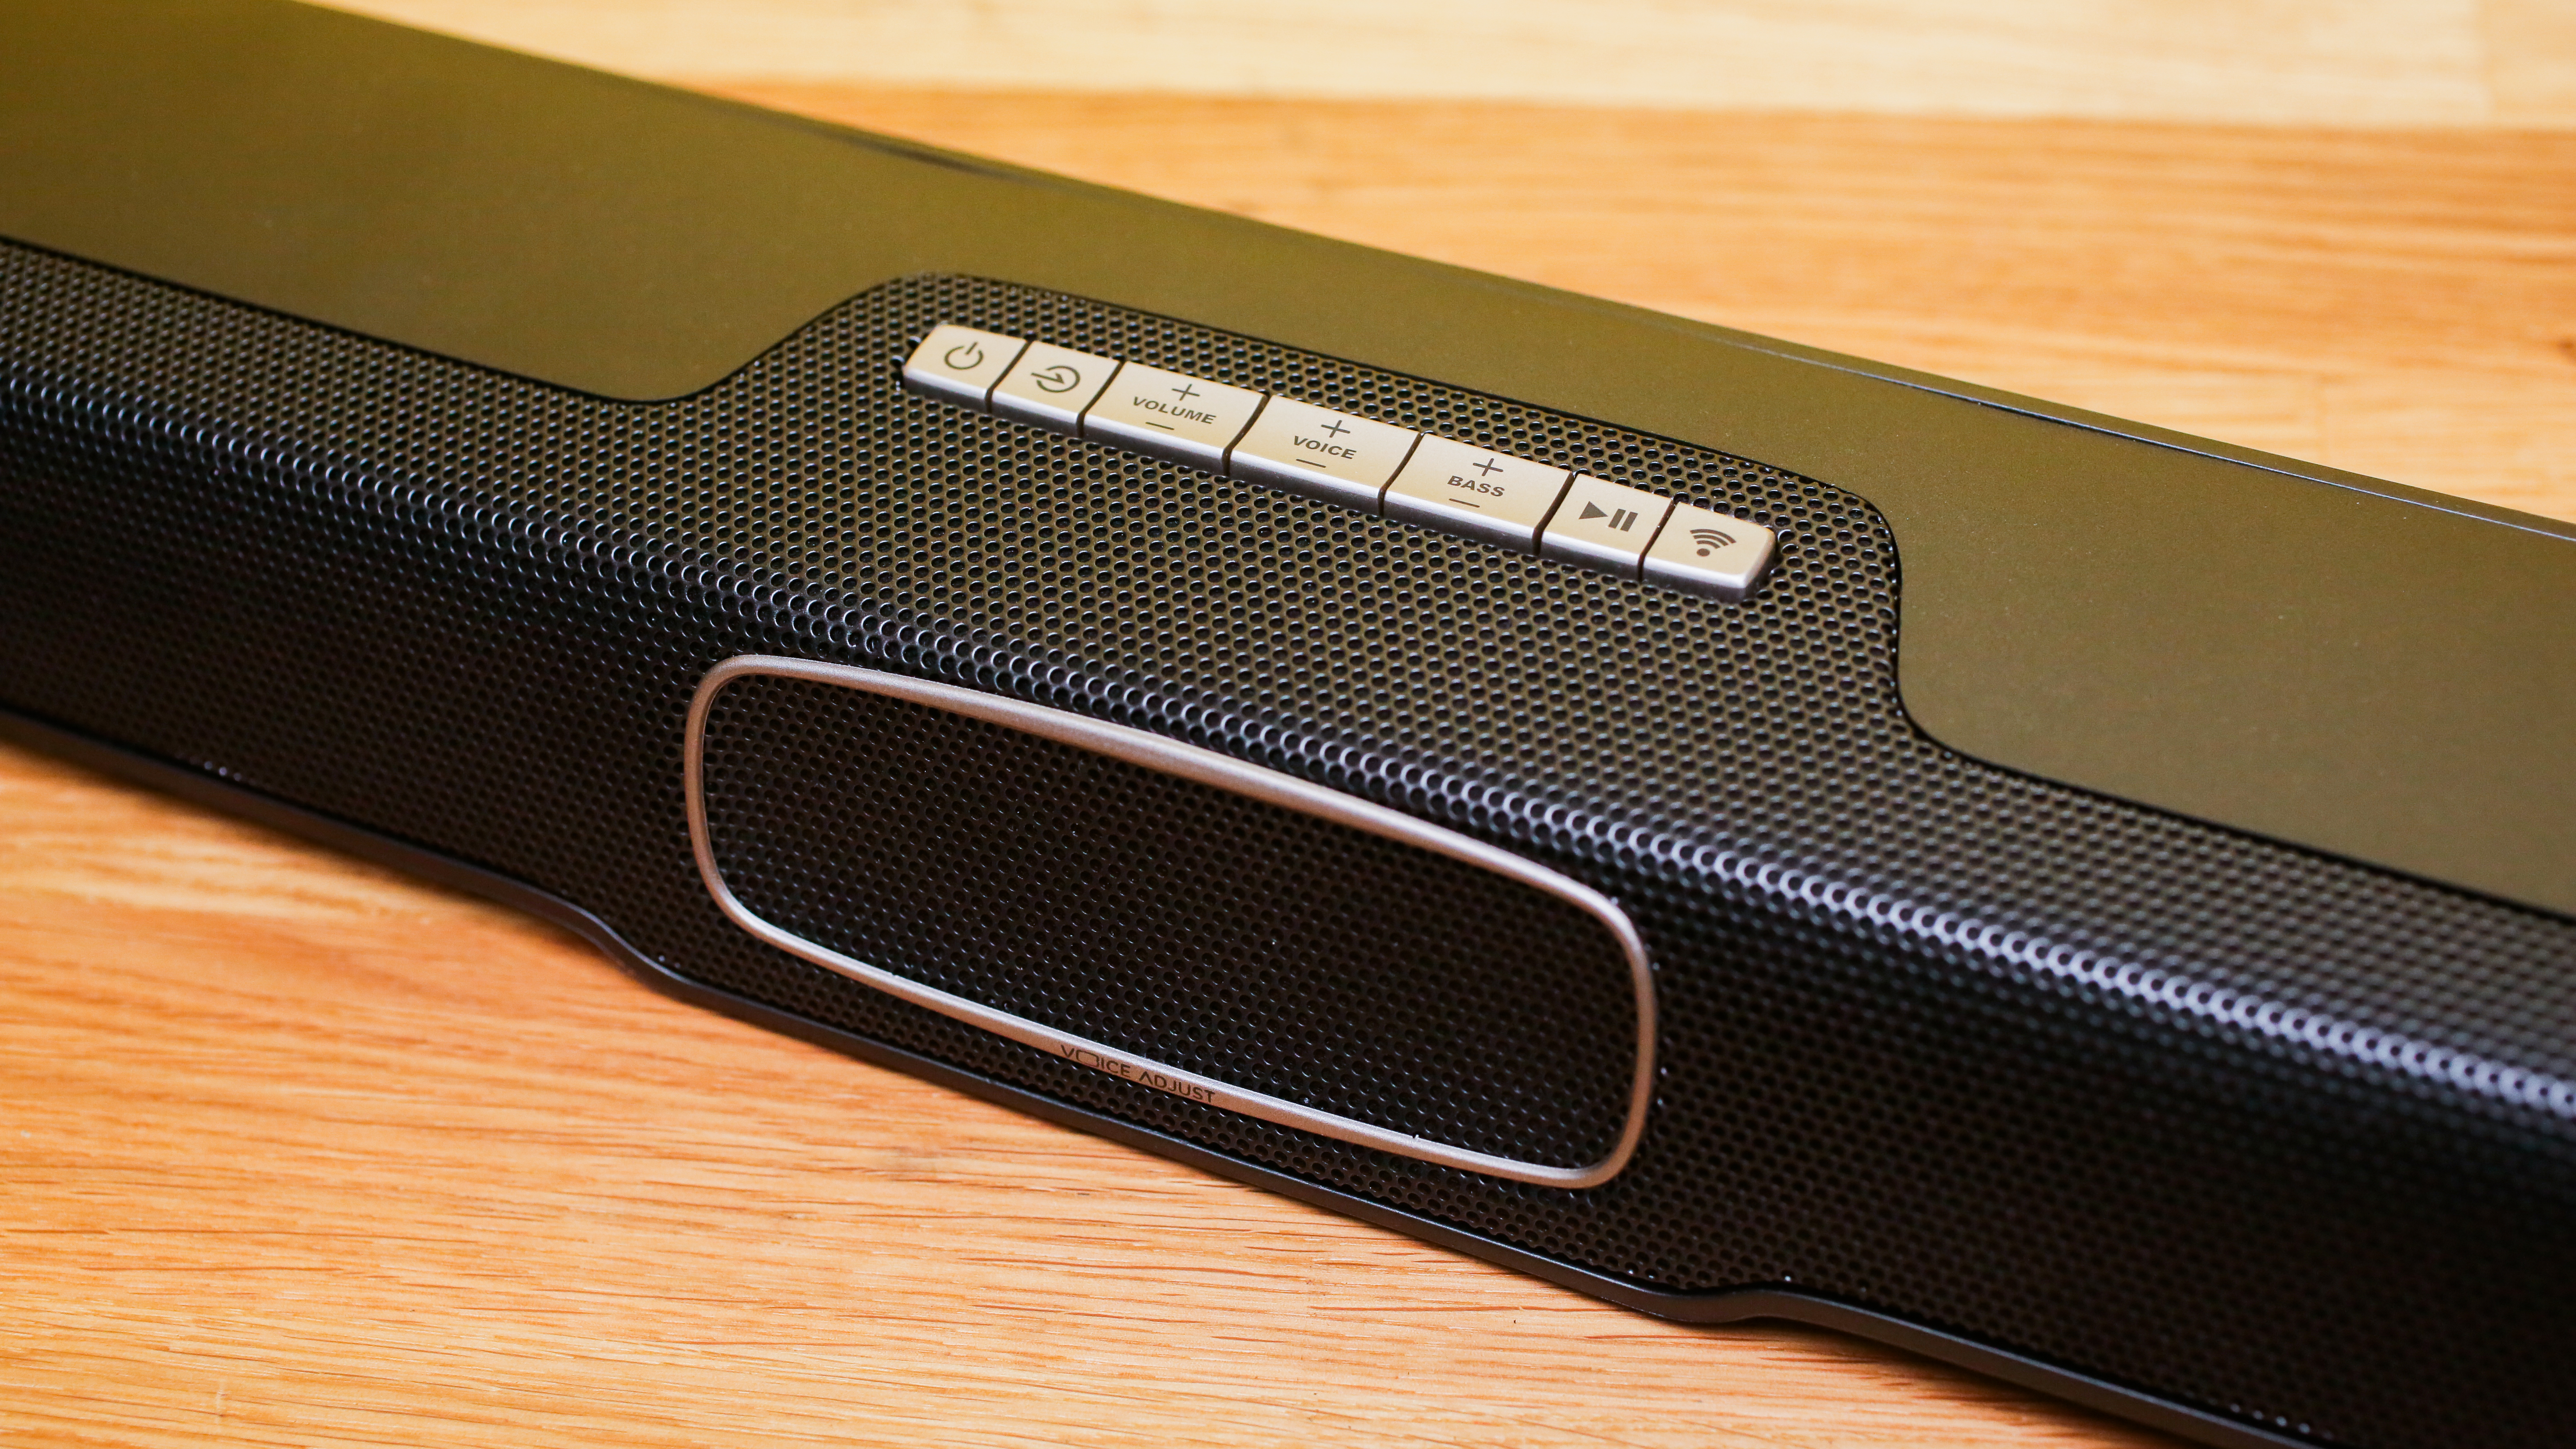 Omni SB1 review: Sound bar makes movies thrilling and intelligible - CNET